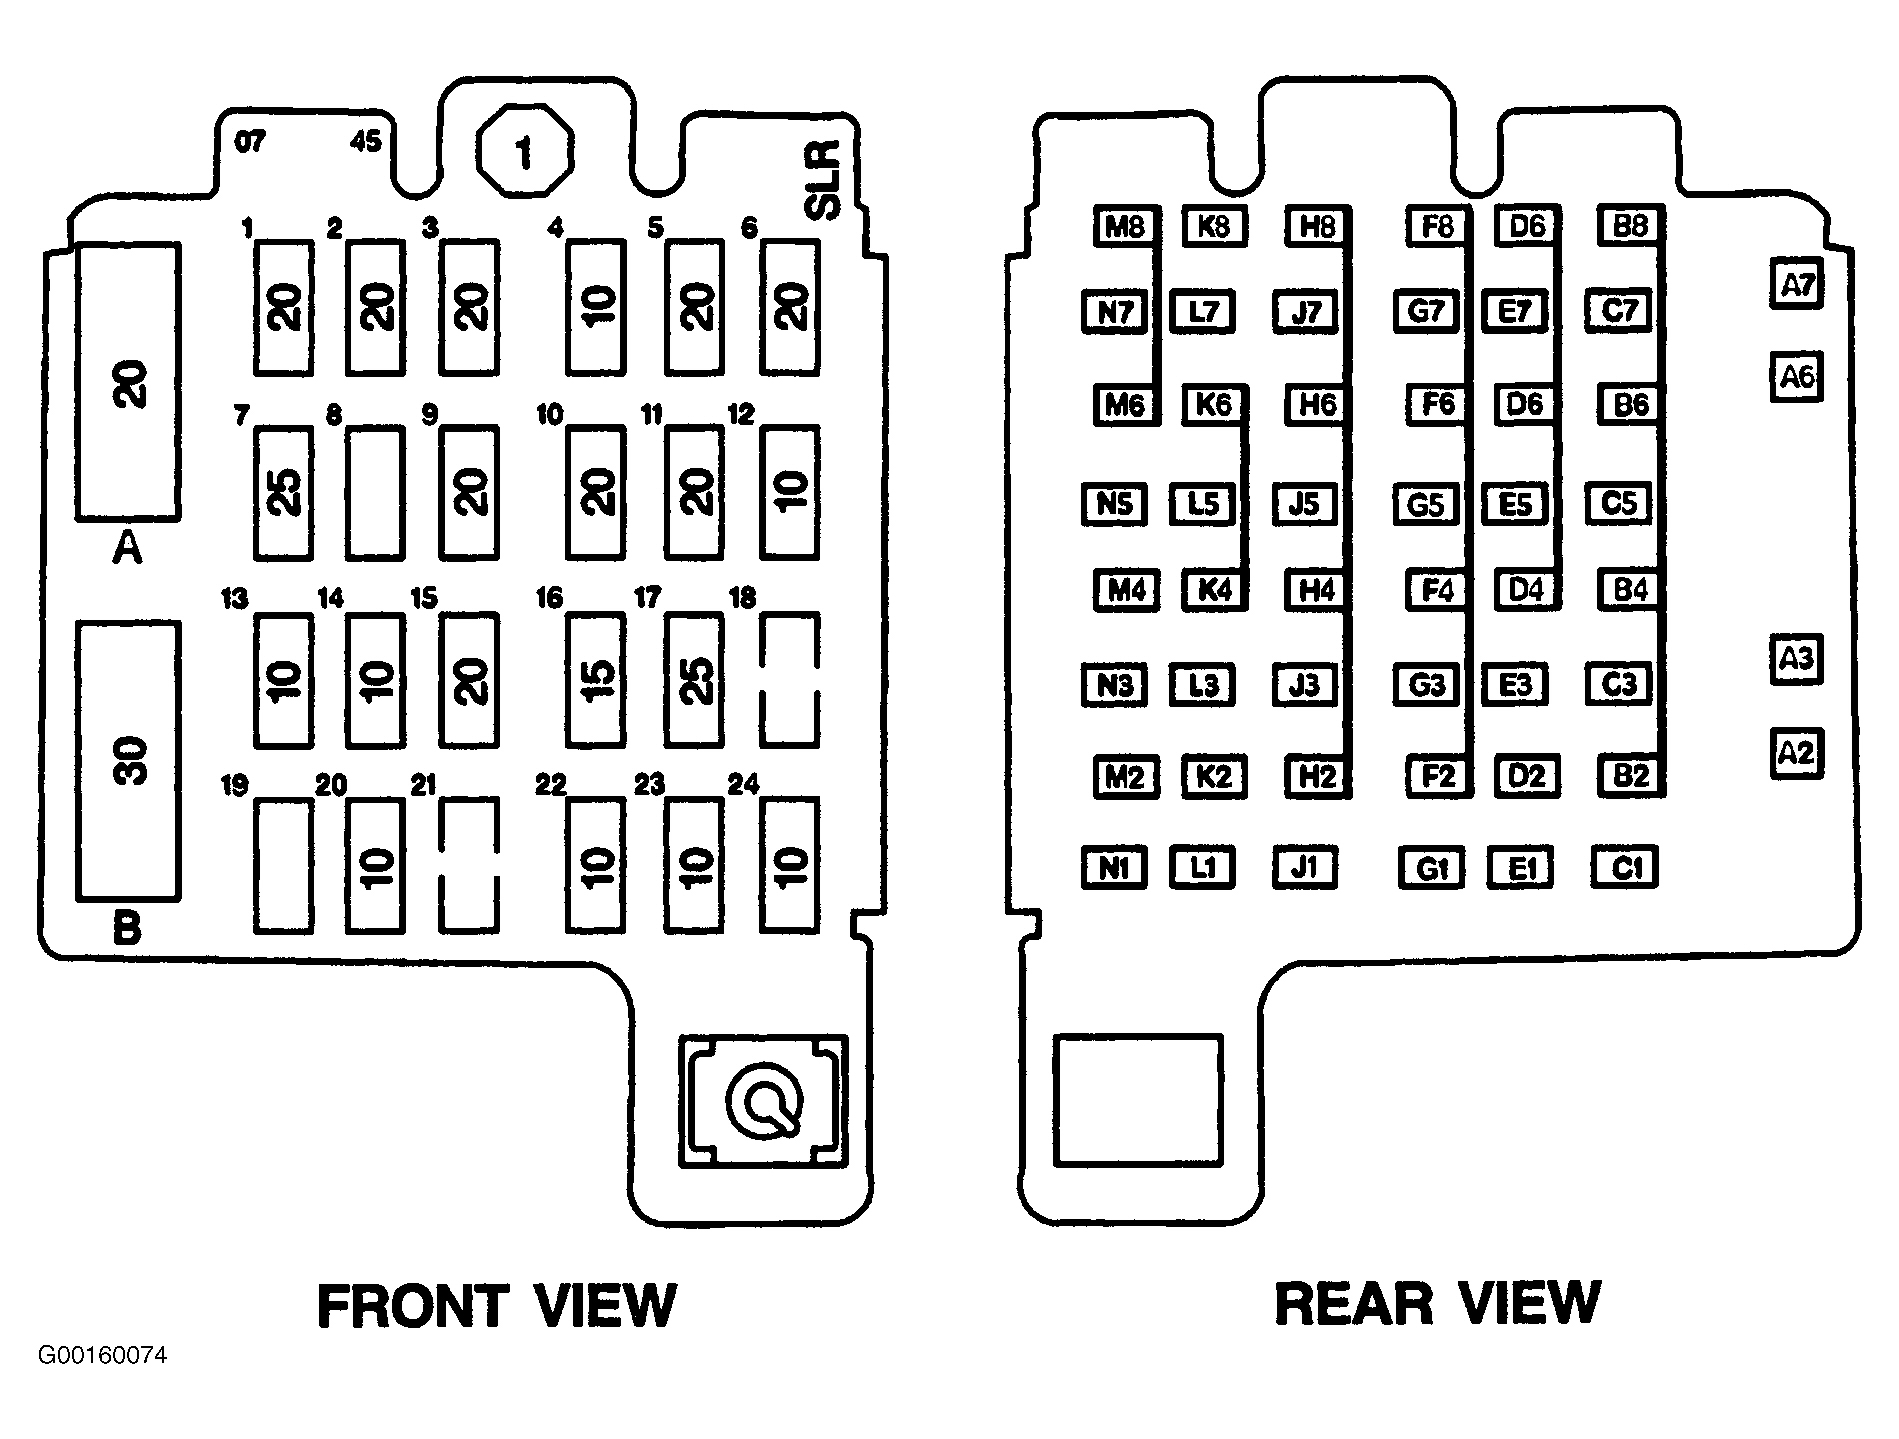 Isuzu Hombre S 1997 - Component Locations -  Identifying Fuse Box Layout